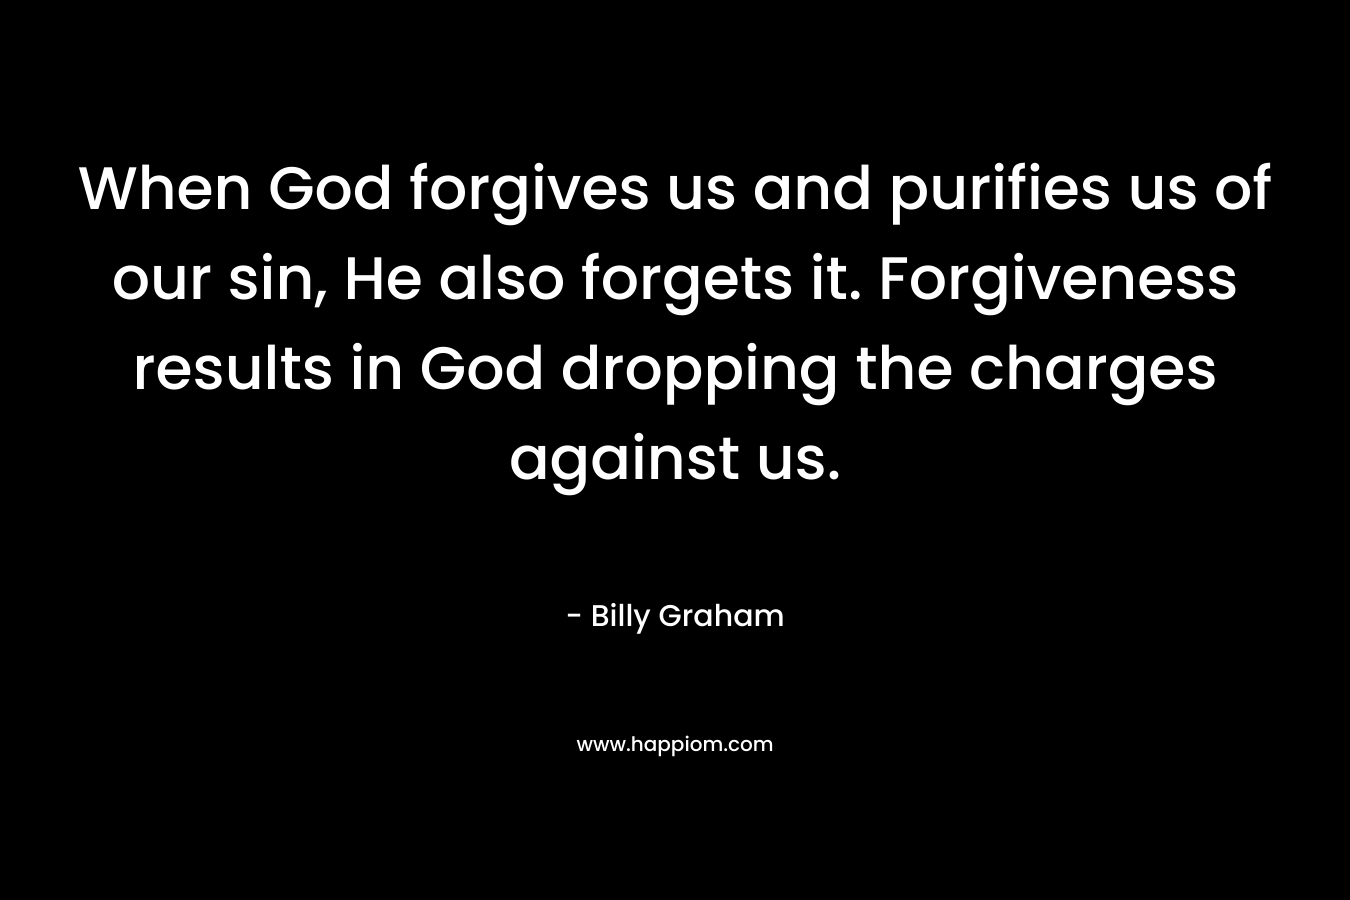 When God forgives us and purifies us of our sin, He also forgets it. Forgiveness results in God dropping the charges against us. – Billy Graham